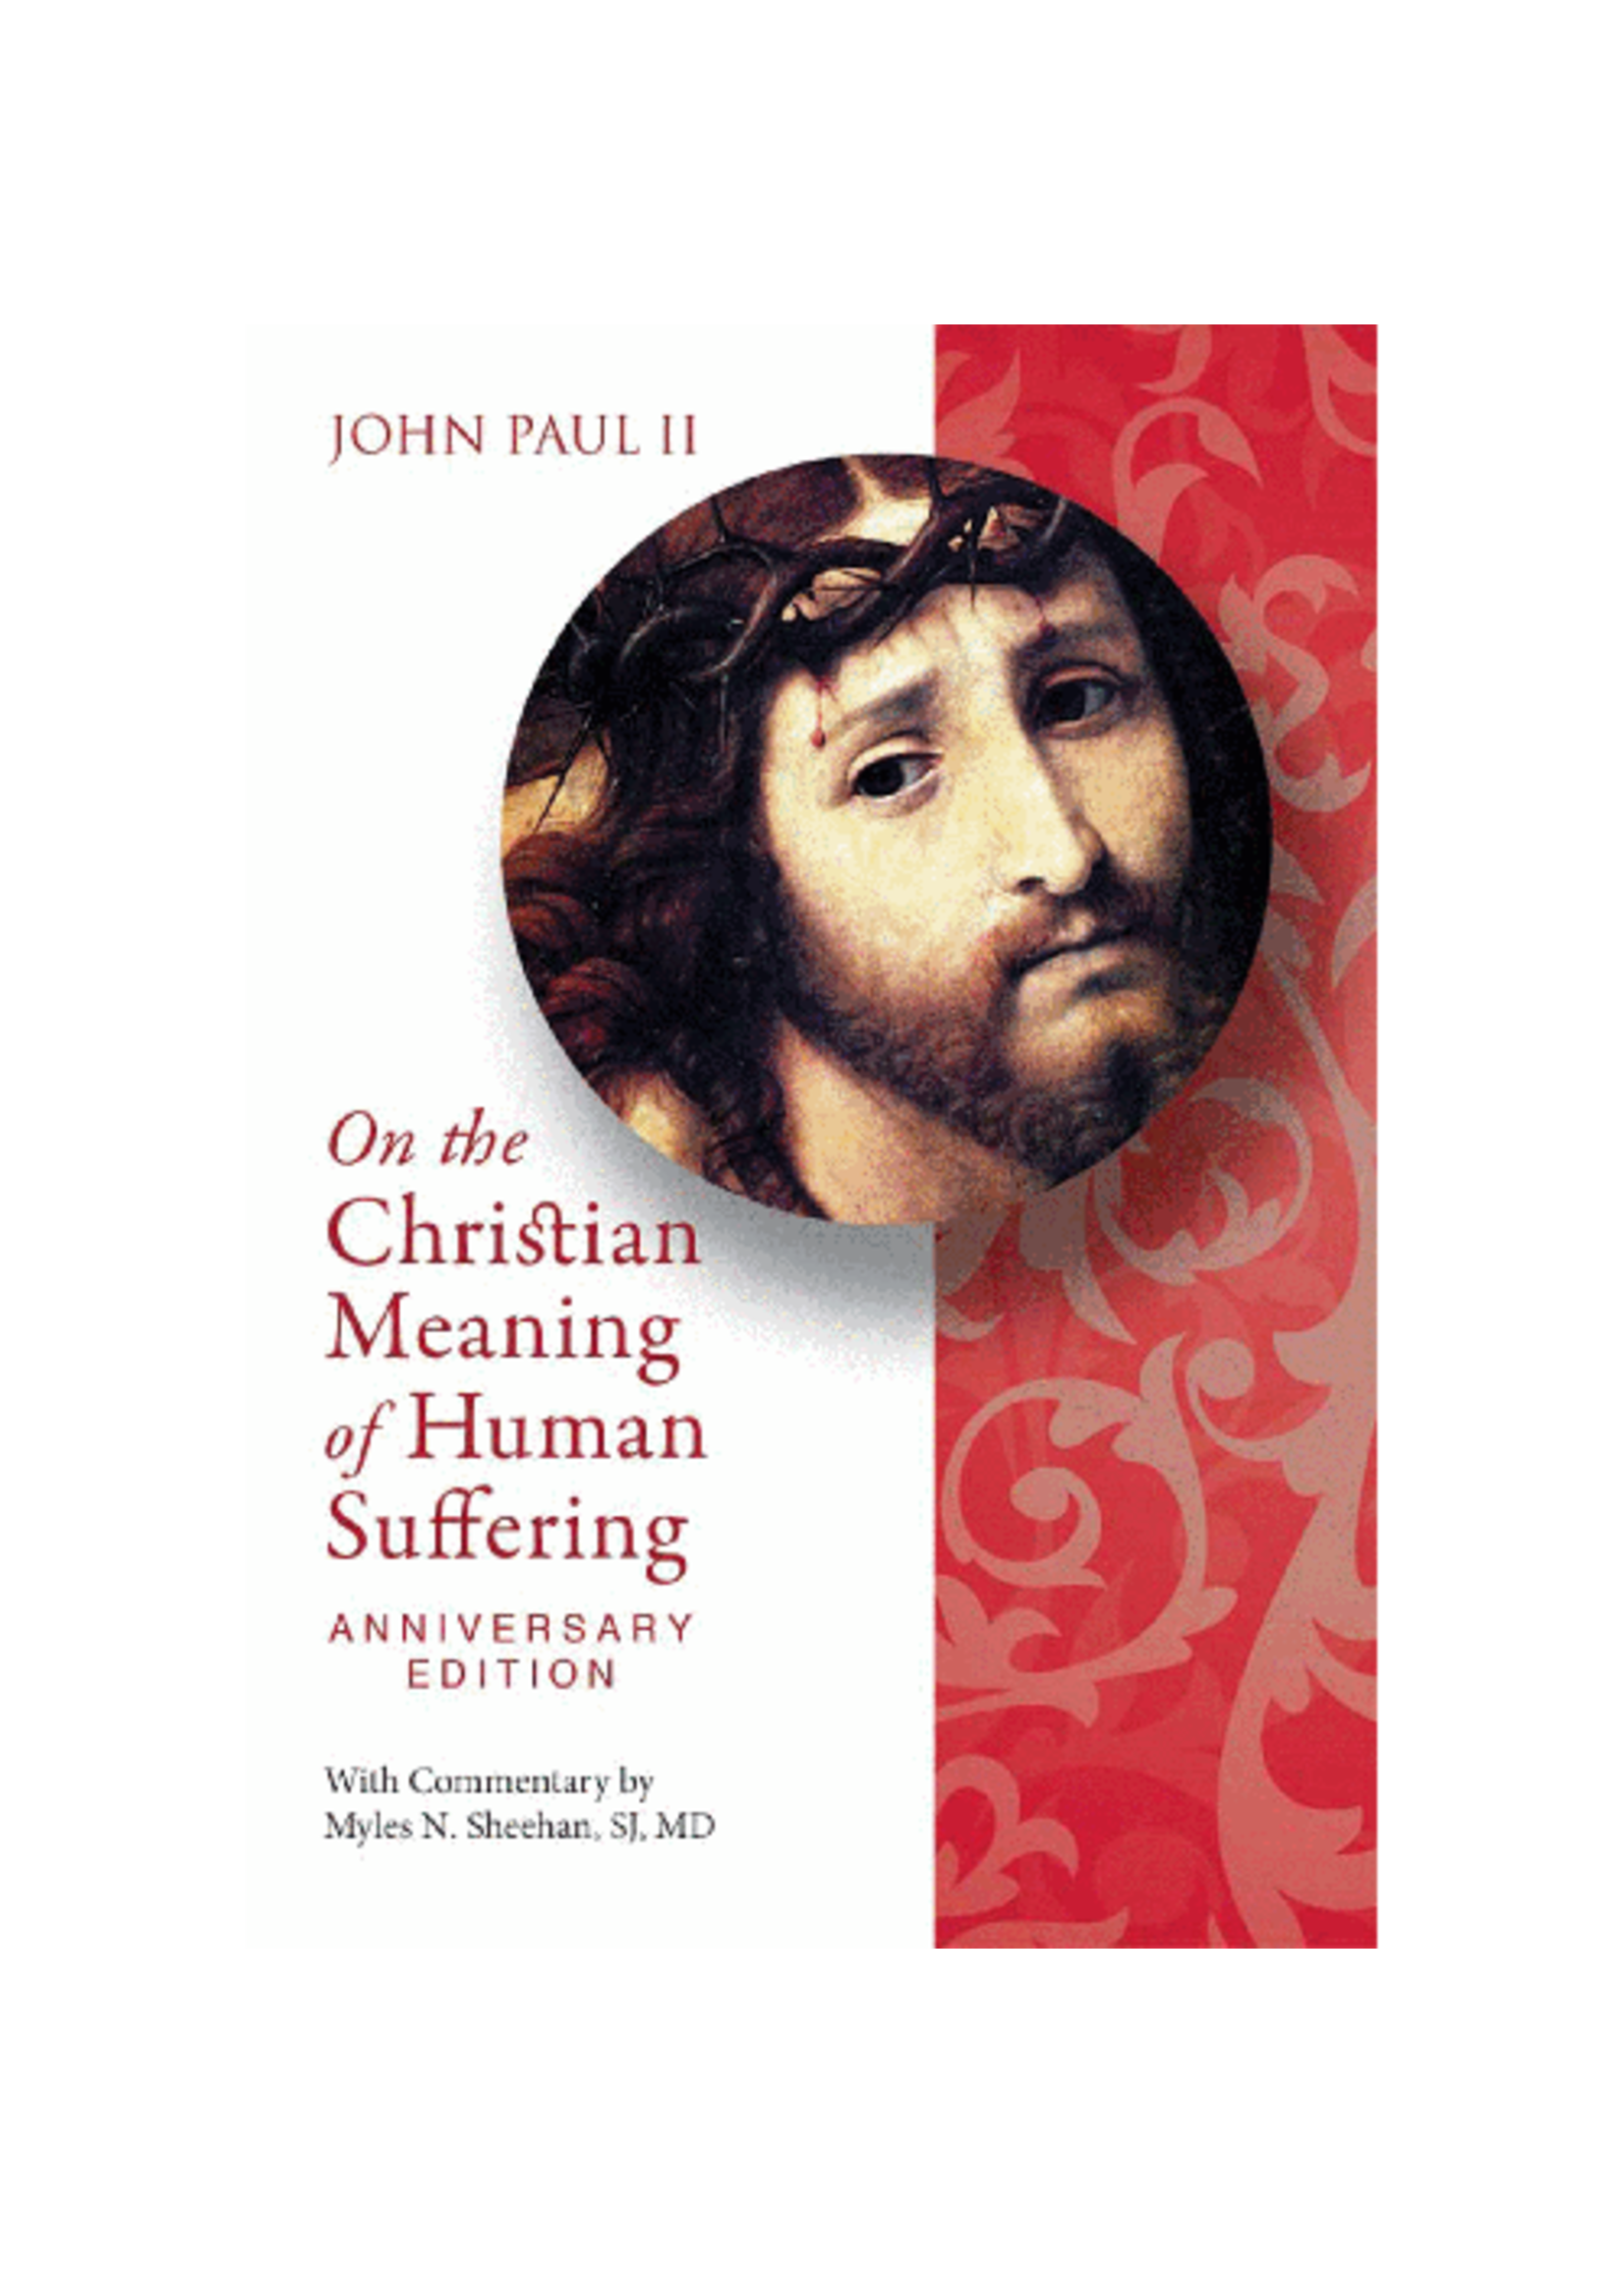 On the Christian Meaning Human Suffering